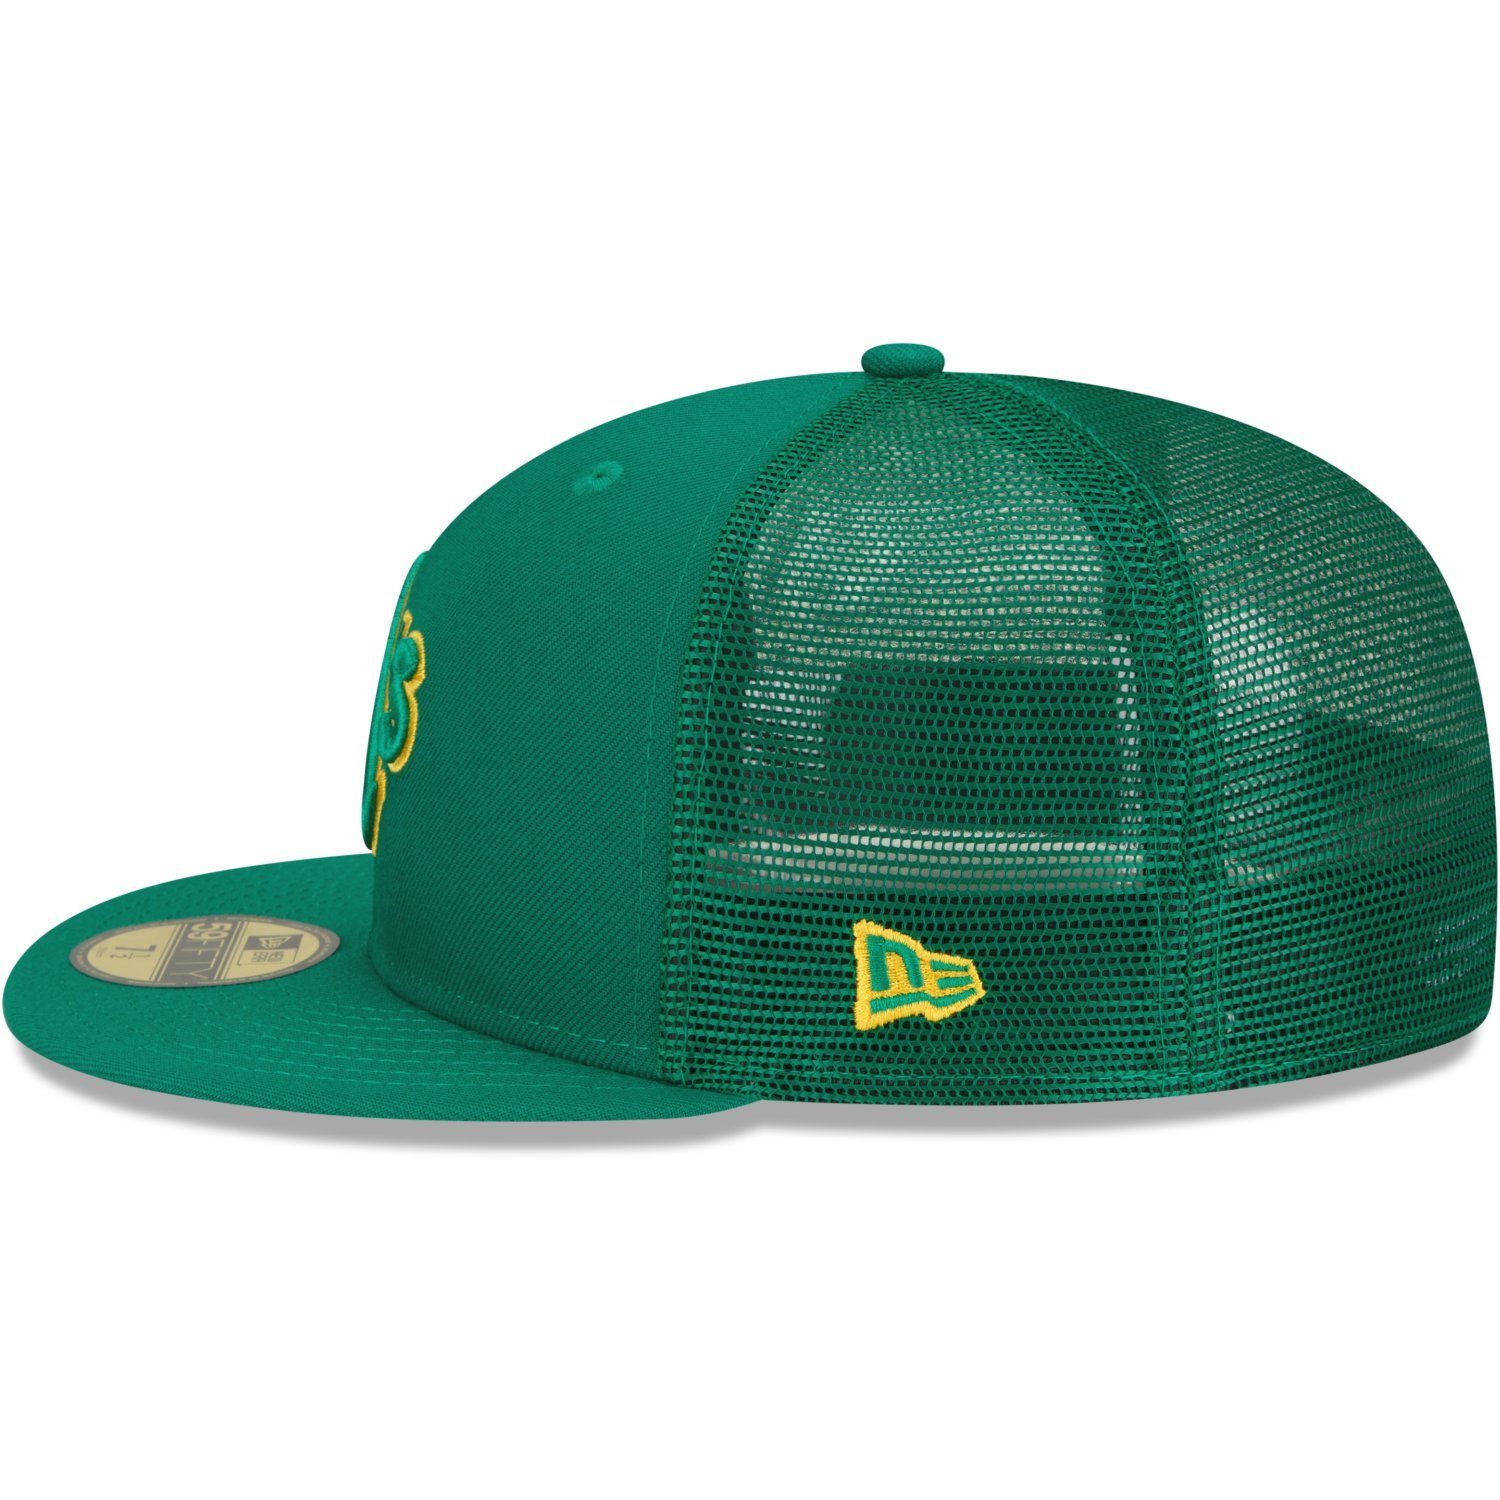 Cap New Fitted 59Fifty Era Oakland BATTING Athletics PRACTICE